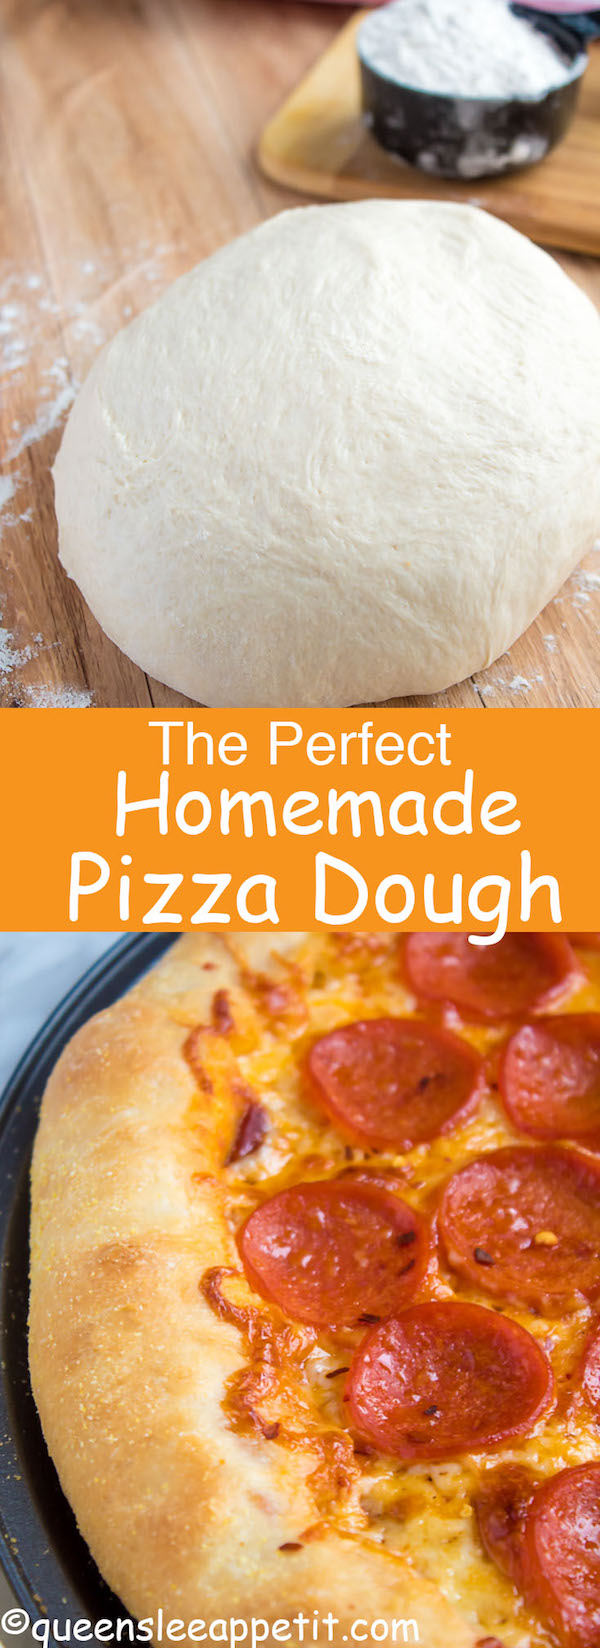 The Perfect Homemade Pizza Dough ~ Recipe | Queenslee Appétit